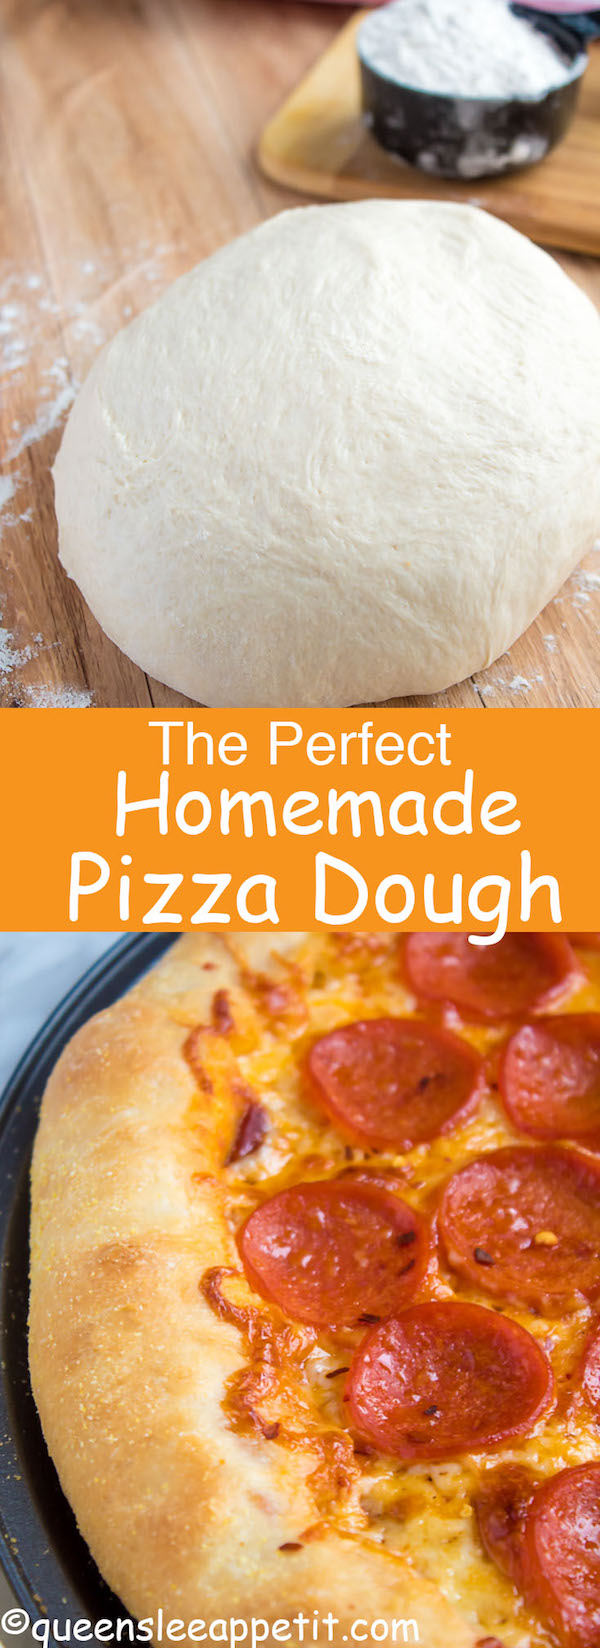 The Perfect Homemade Pizza Dough ~ Recipe | Queenslee Appétit